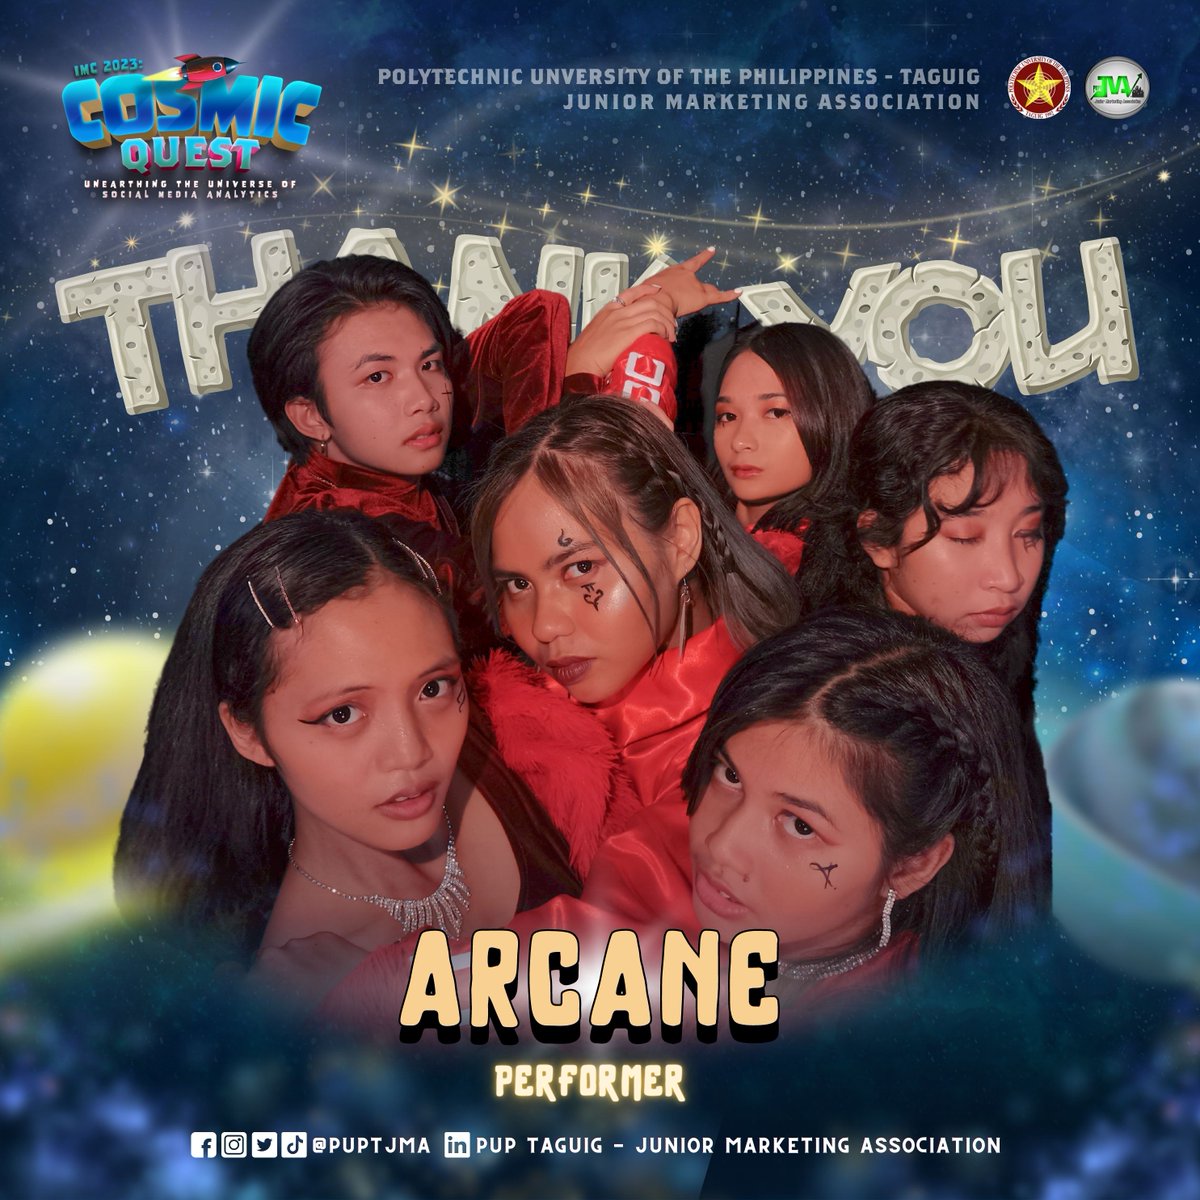 The PUPT-JMA extends its heartfelt appreciation to Ms. Isang Manlapaz and ARCANE, for making our quest fun by exhibiting your talents. 

Our explorations became worthwhile with you! 

COSMIC QUEST: Unearthing the Universe of Social Media Analytics 

#CosmicQuest
#PUPTJMA